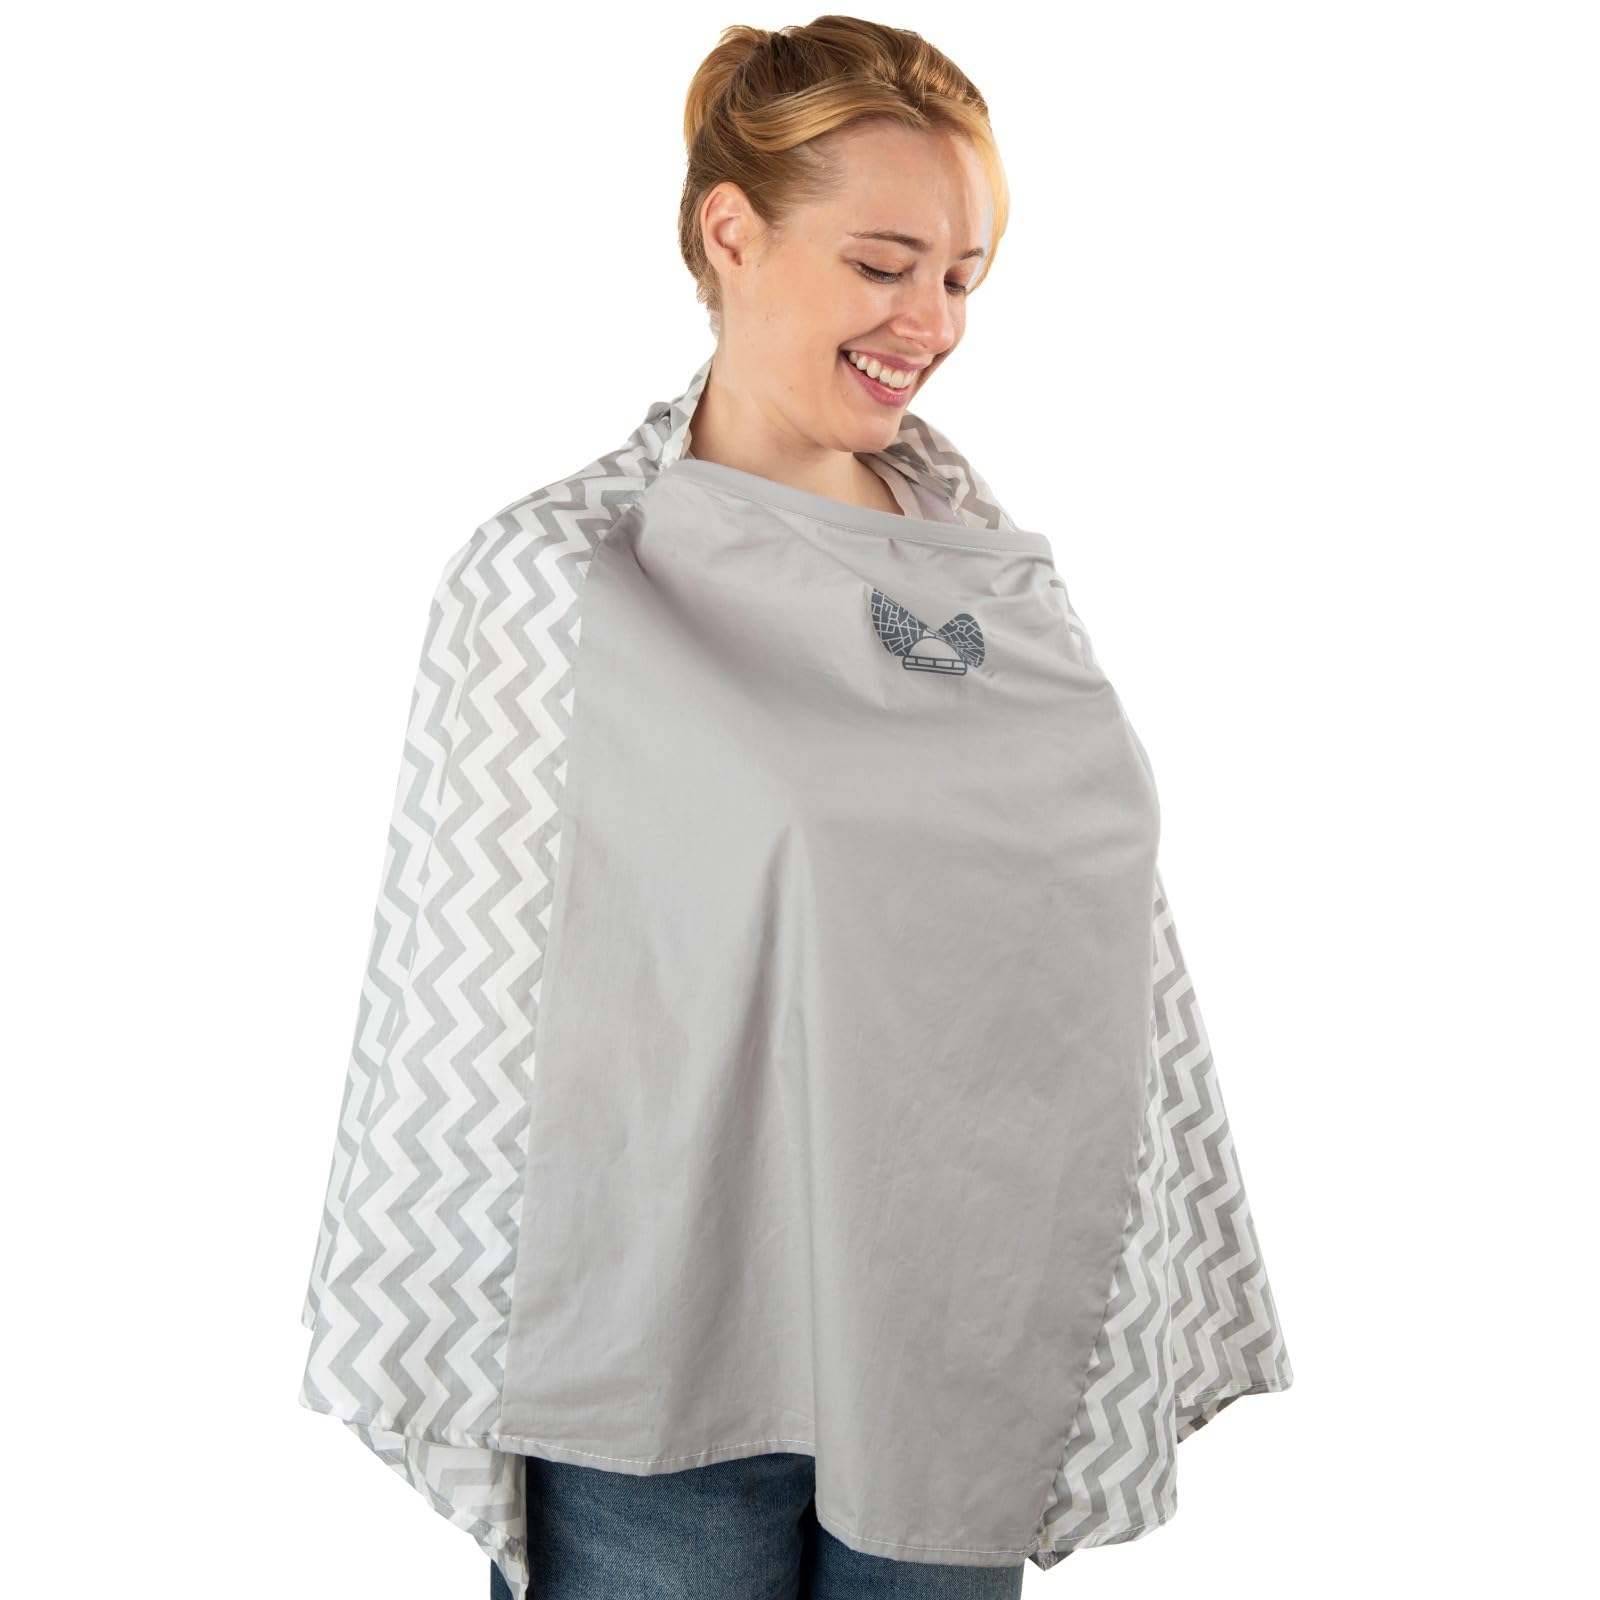 Fair-e-Trade Nursing Cover for Breastfeeding - 360 Degree Privacy Poncho, View Baby Hands-Free, Soft & 100% Breathable Cotton, Attached Carry Bag, 8-in-1 Uses, Covers Car Seat & Shopping Cart